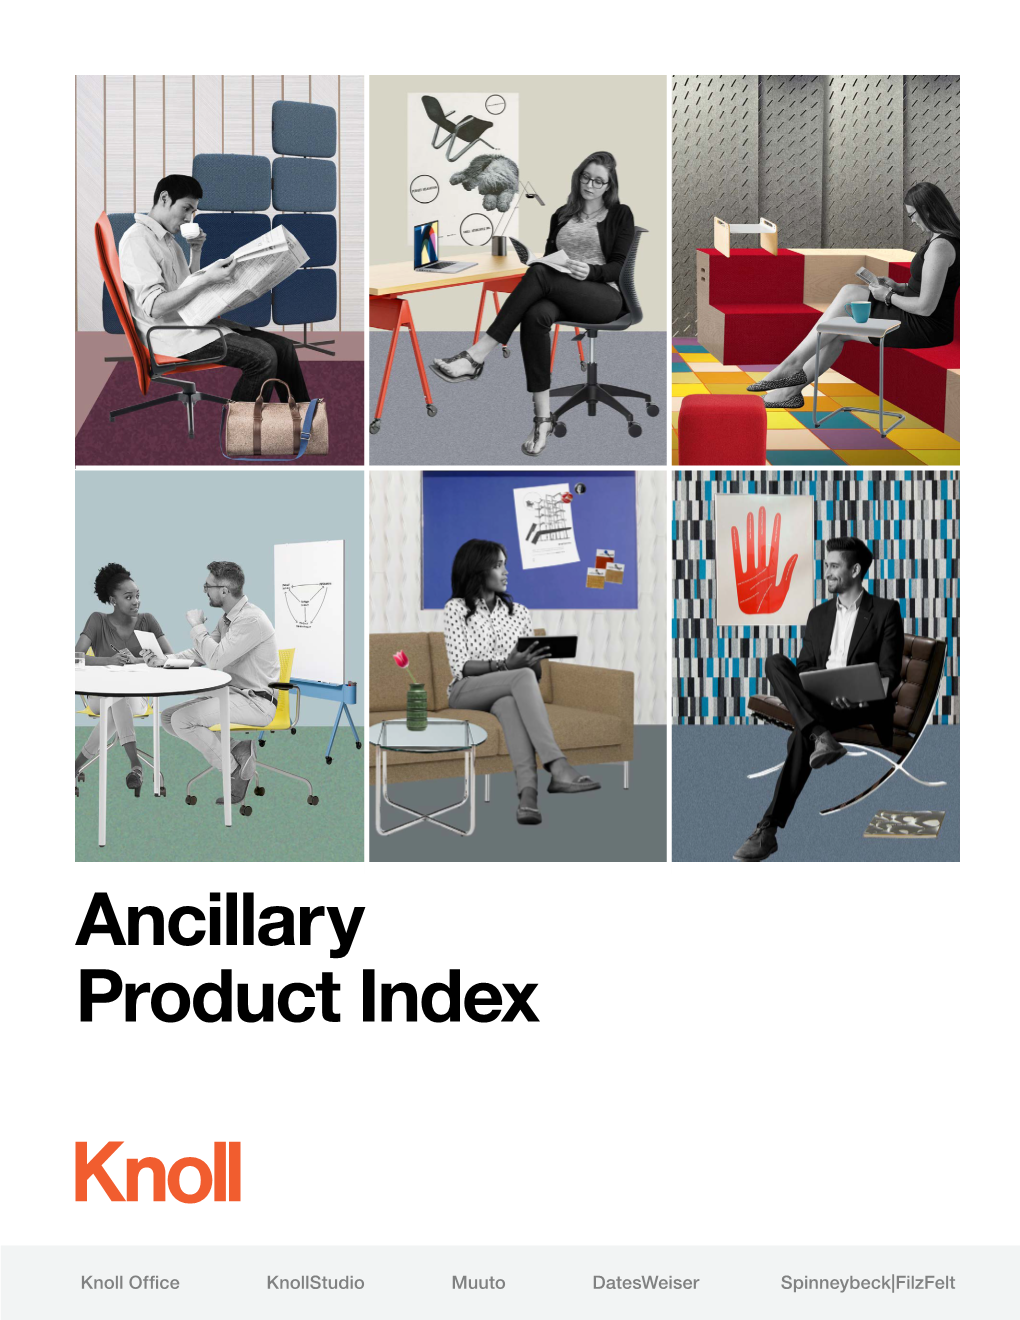 Knoll Ancillary Product Index